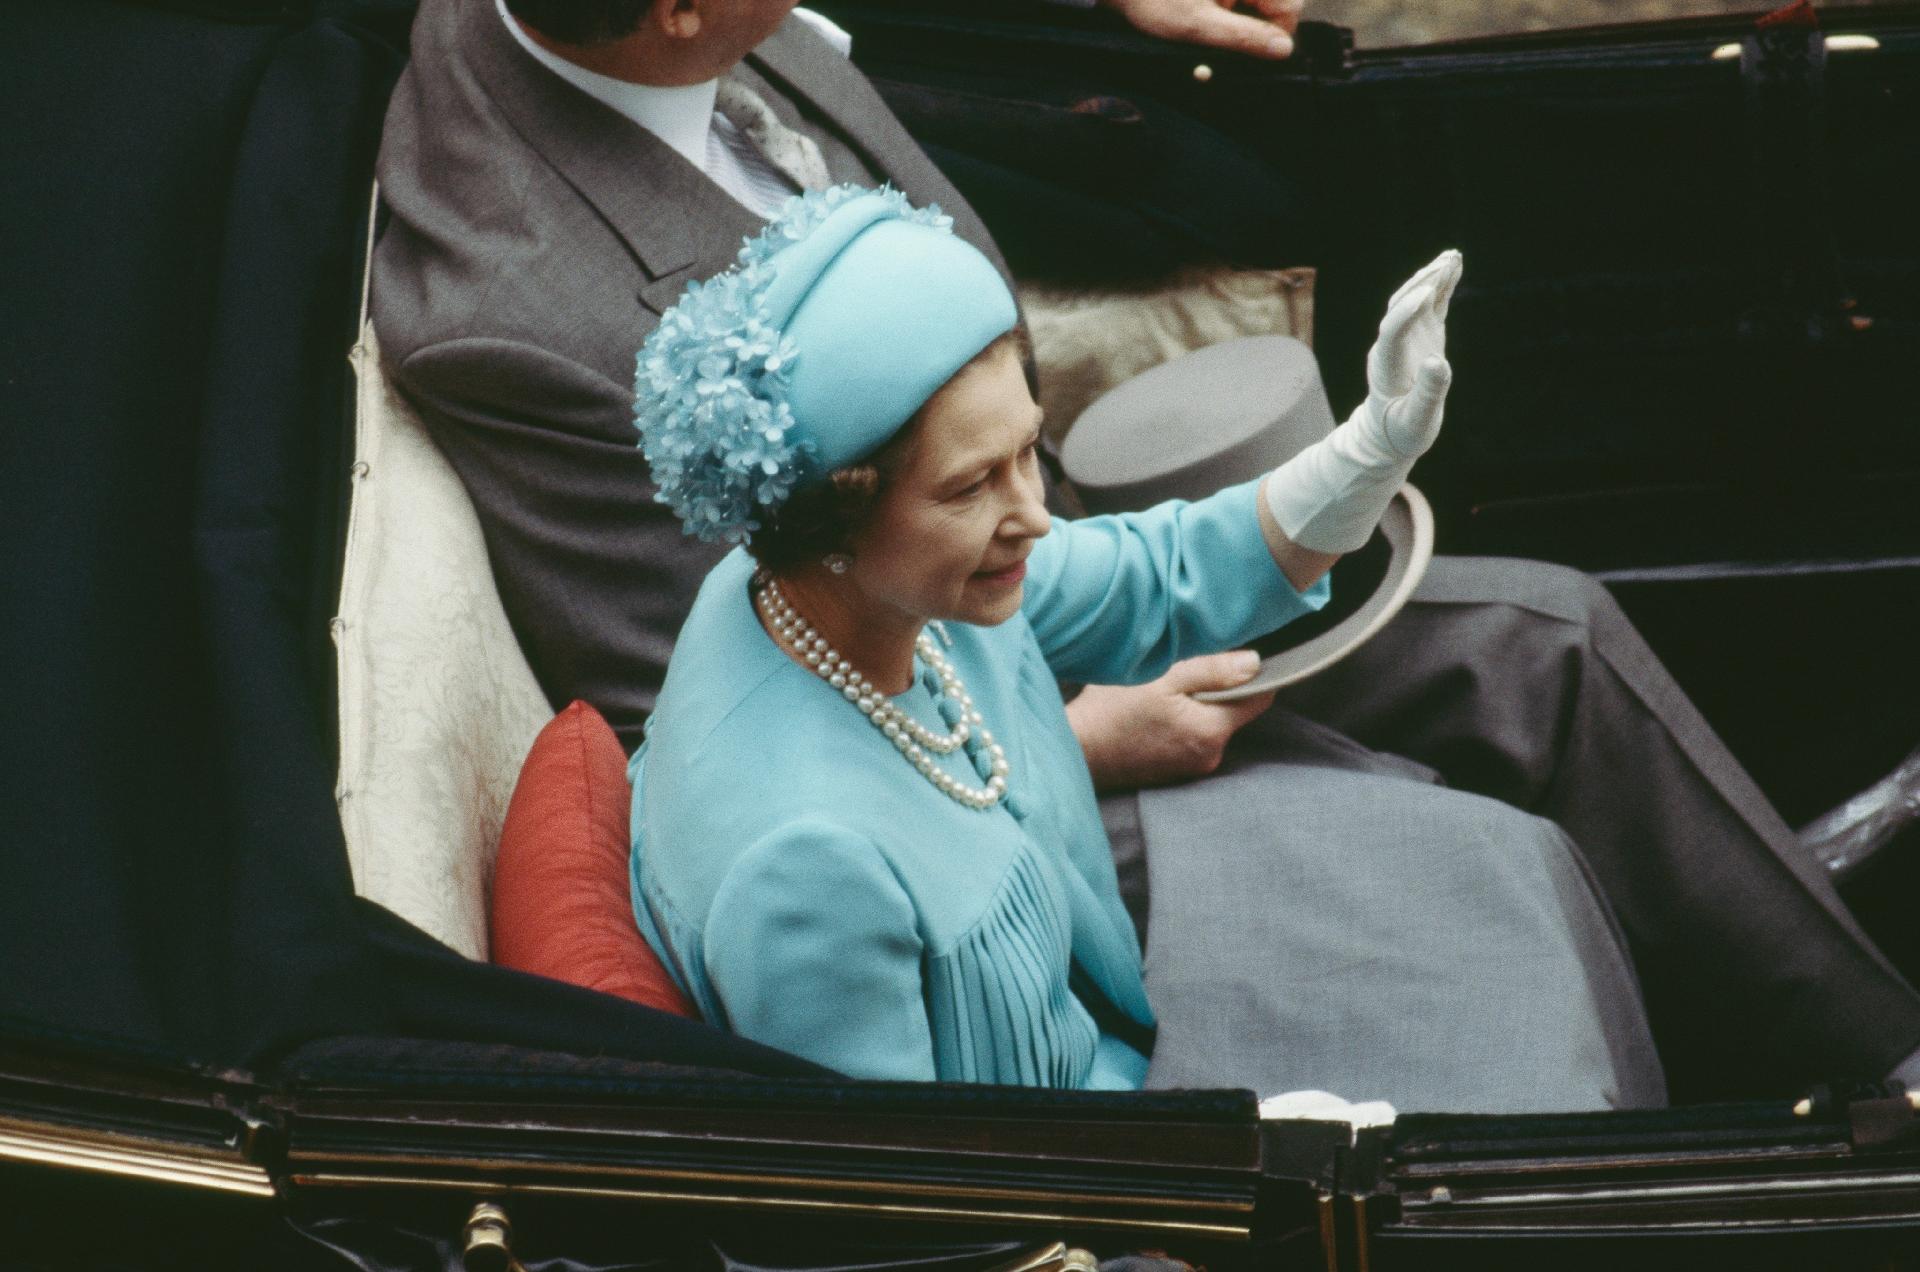 Queen Elizabeth II arrives for Charles and Diana's wedding ceremony in July 1981 - Getty Images